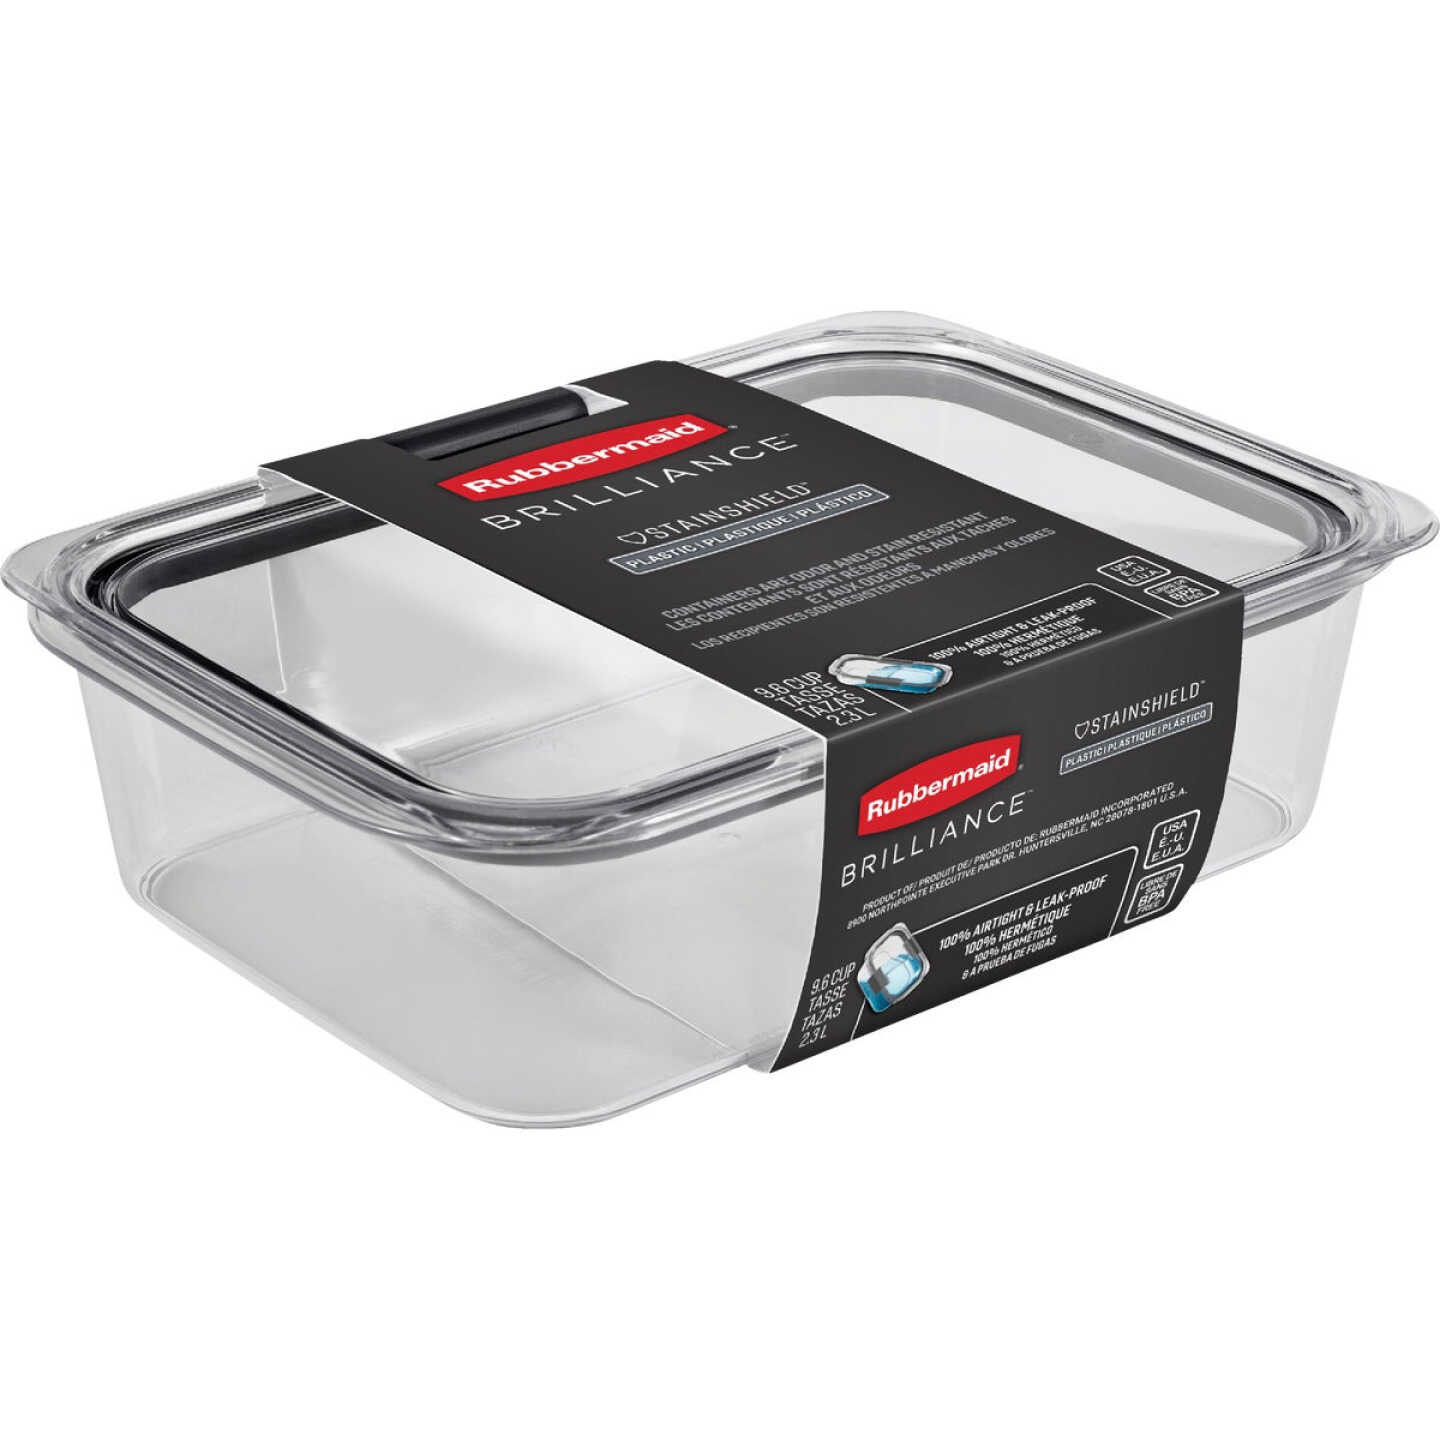 1.5 Pint Freezer Storage Container (4-Pack) - Arrow Home Products